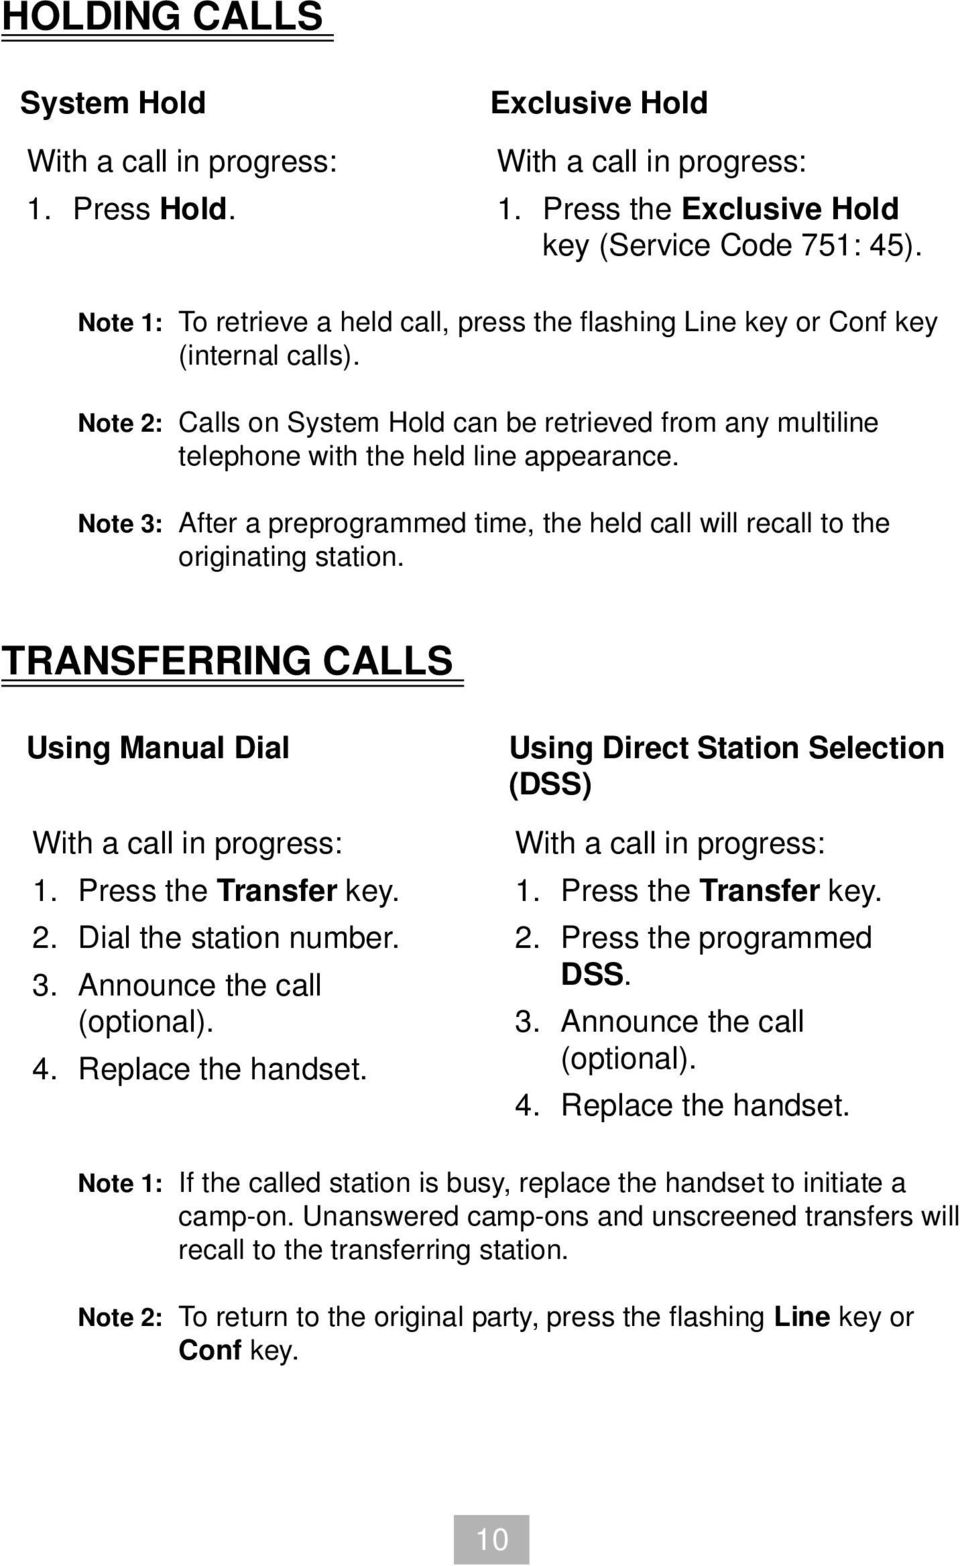 Note 3: After a preprogrammed time, the held call will recall to the originating station. TRANSFERRING CALLS Using Manual Dial With a call in progress: 1. Press the Transfer key. 2.